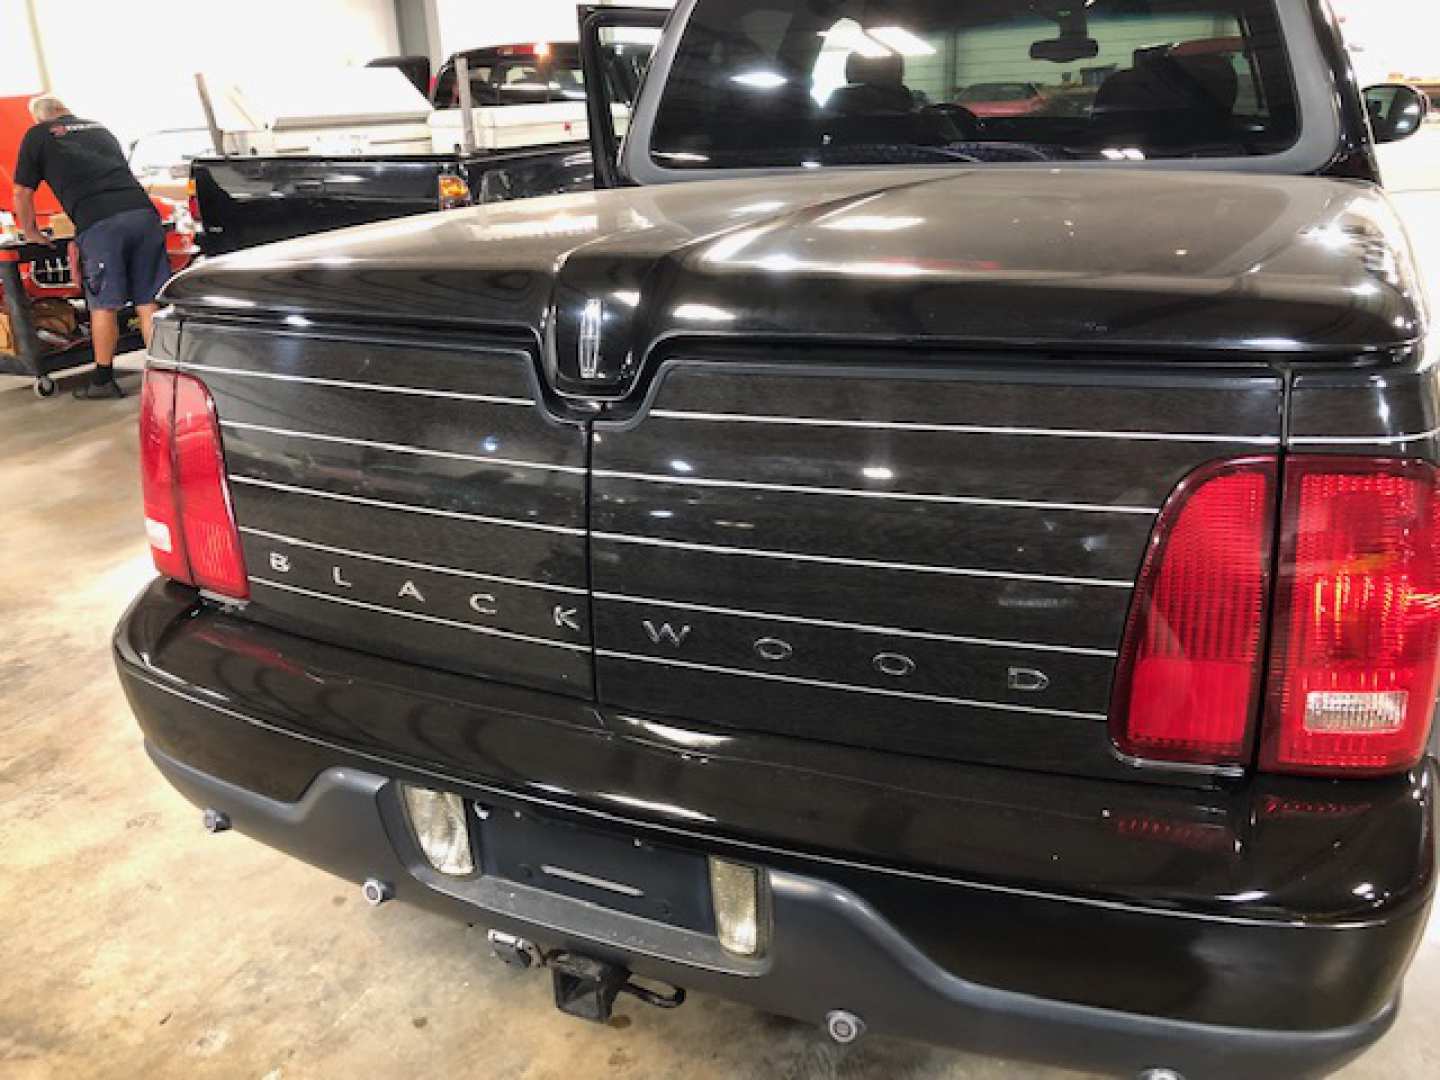 3rd Image of a 2002 LINCOLN BLACKWOOD